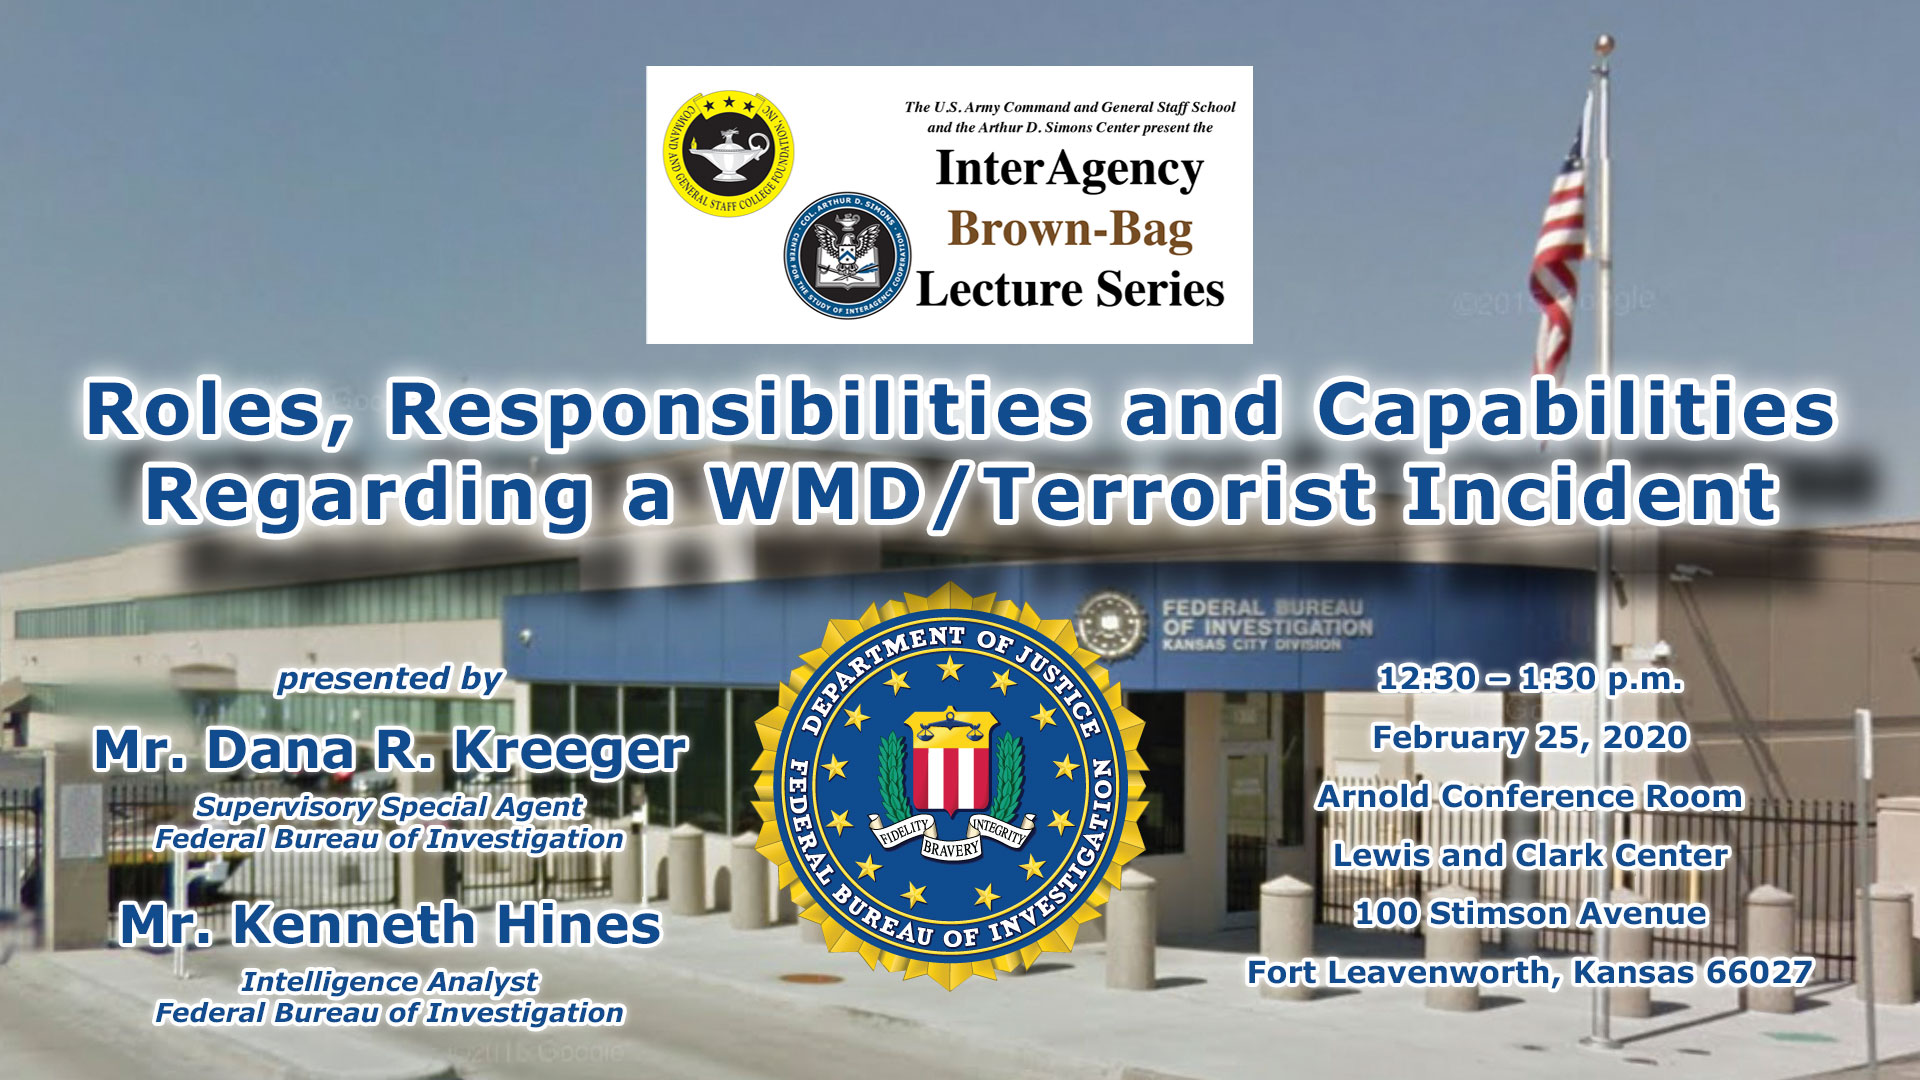 composite info image for the FBI-focused brown-bag lecture on Feb. 25, 2020